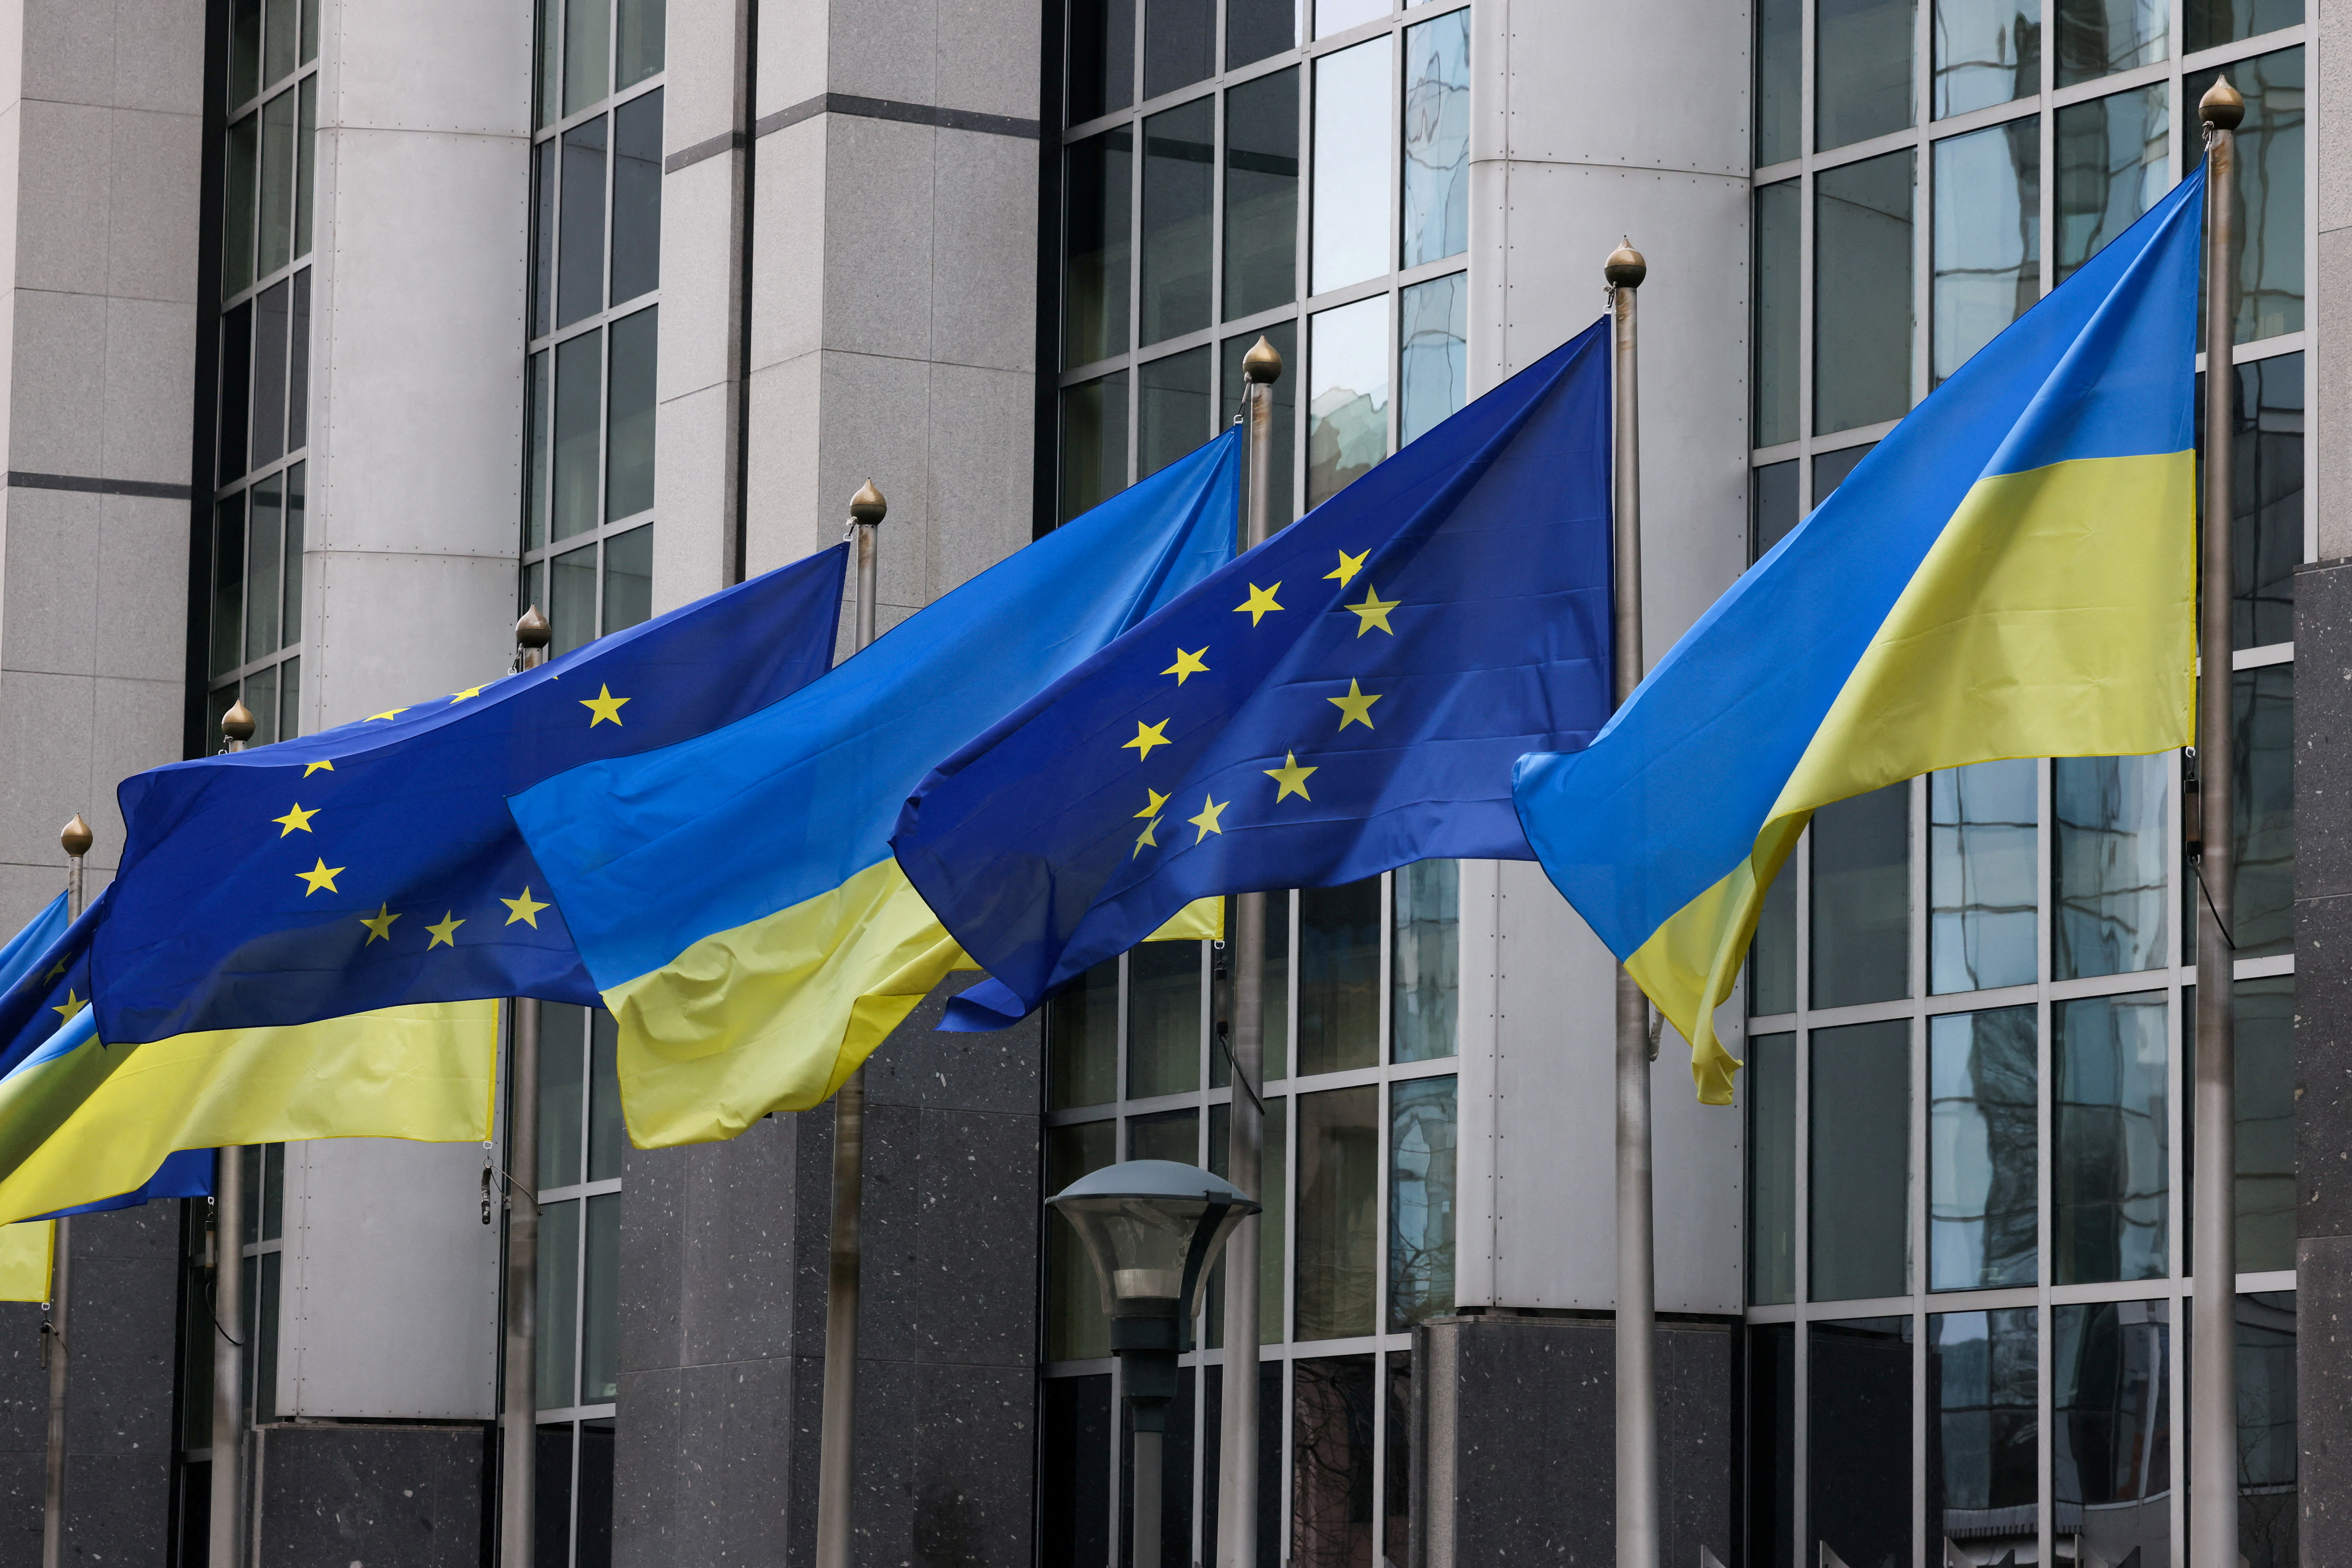 Flags of Ukraine fly in front of the EU Parliament building on the first anniversary of the Russian invasion